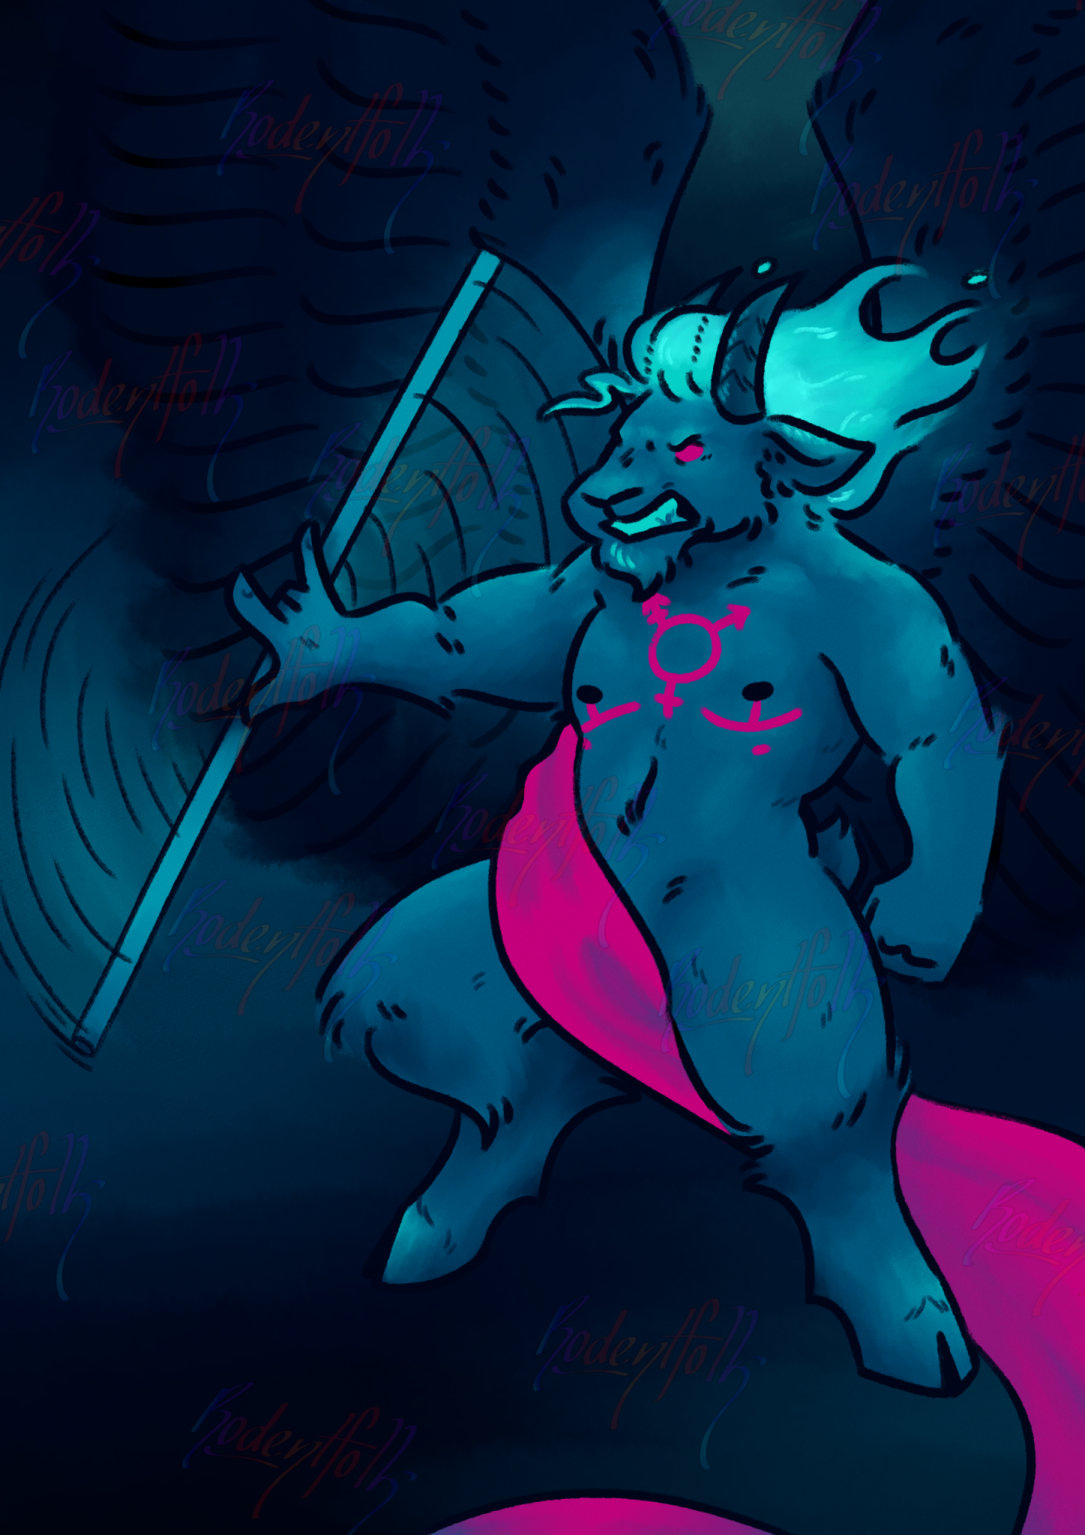 It is a limited palette illustration. The illustration depicts an entirely blue goat-like demon with firey hair. It's grimacing maliciously at something out of view, with it's bright pink eyes and spinning a blue staff in it's right hand. The demon also has pink markings on their chest depicting top surgery scars, and the transgender symbol in the middle of it's chest. The crotch area is covered by a bright pink cloth that wraps from the right side of it's body and behind the left leg. It's large dark blue wings are open and flapping as the demon looms over a horizon.